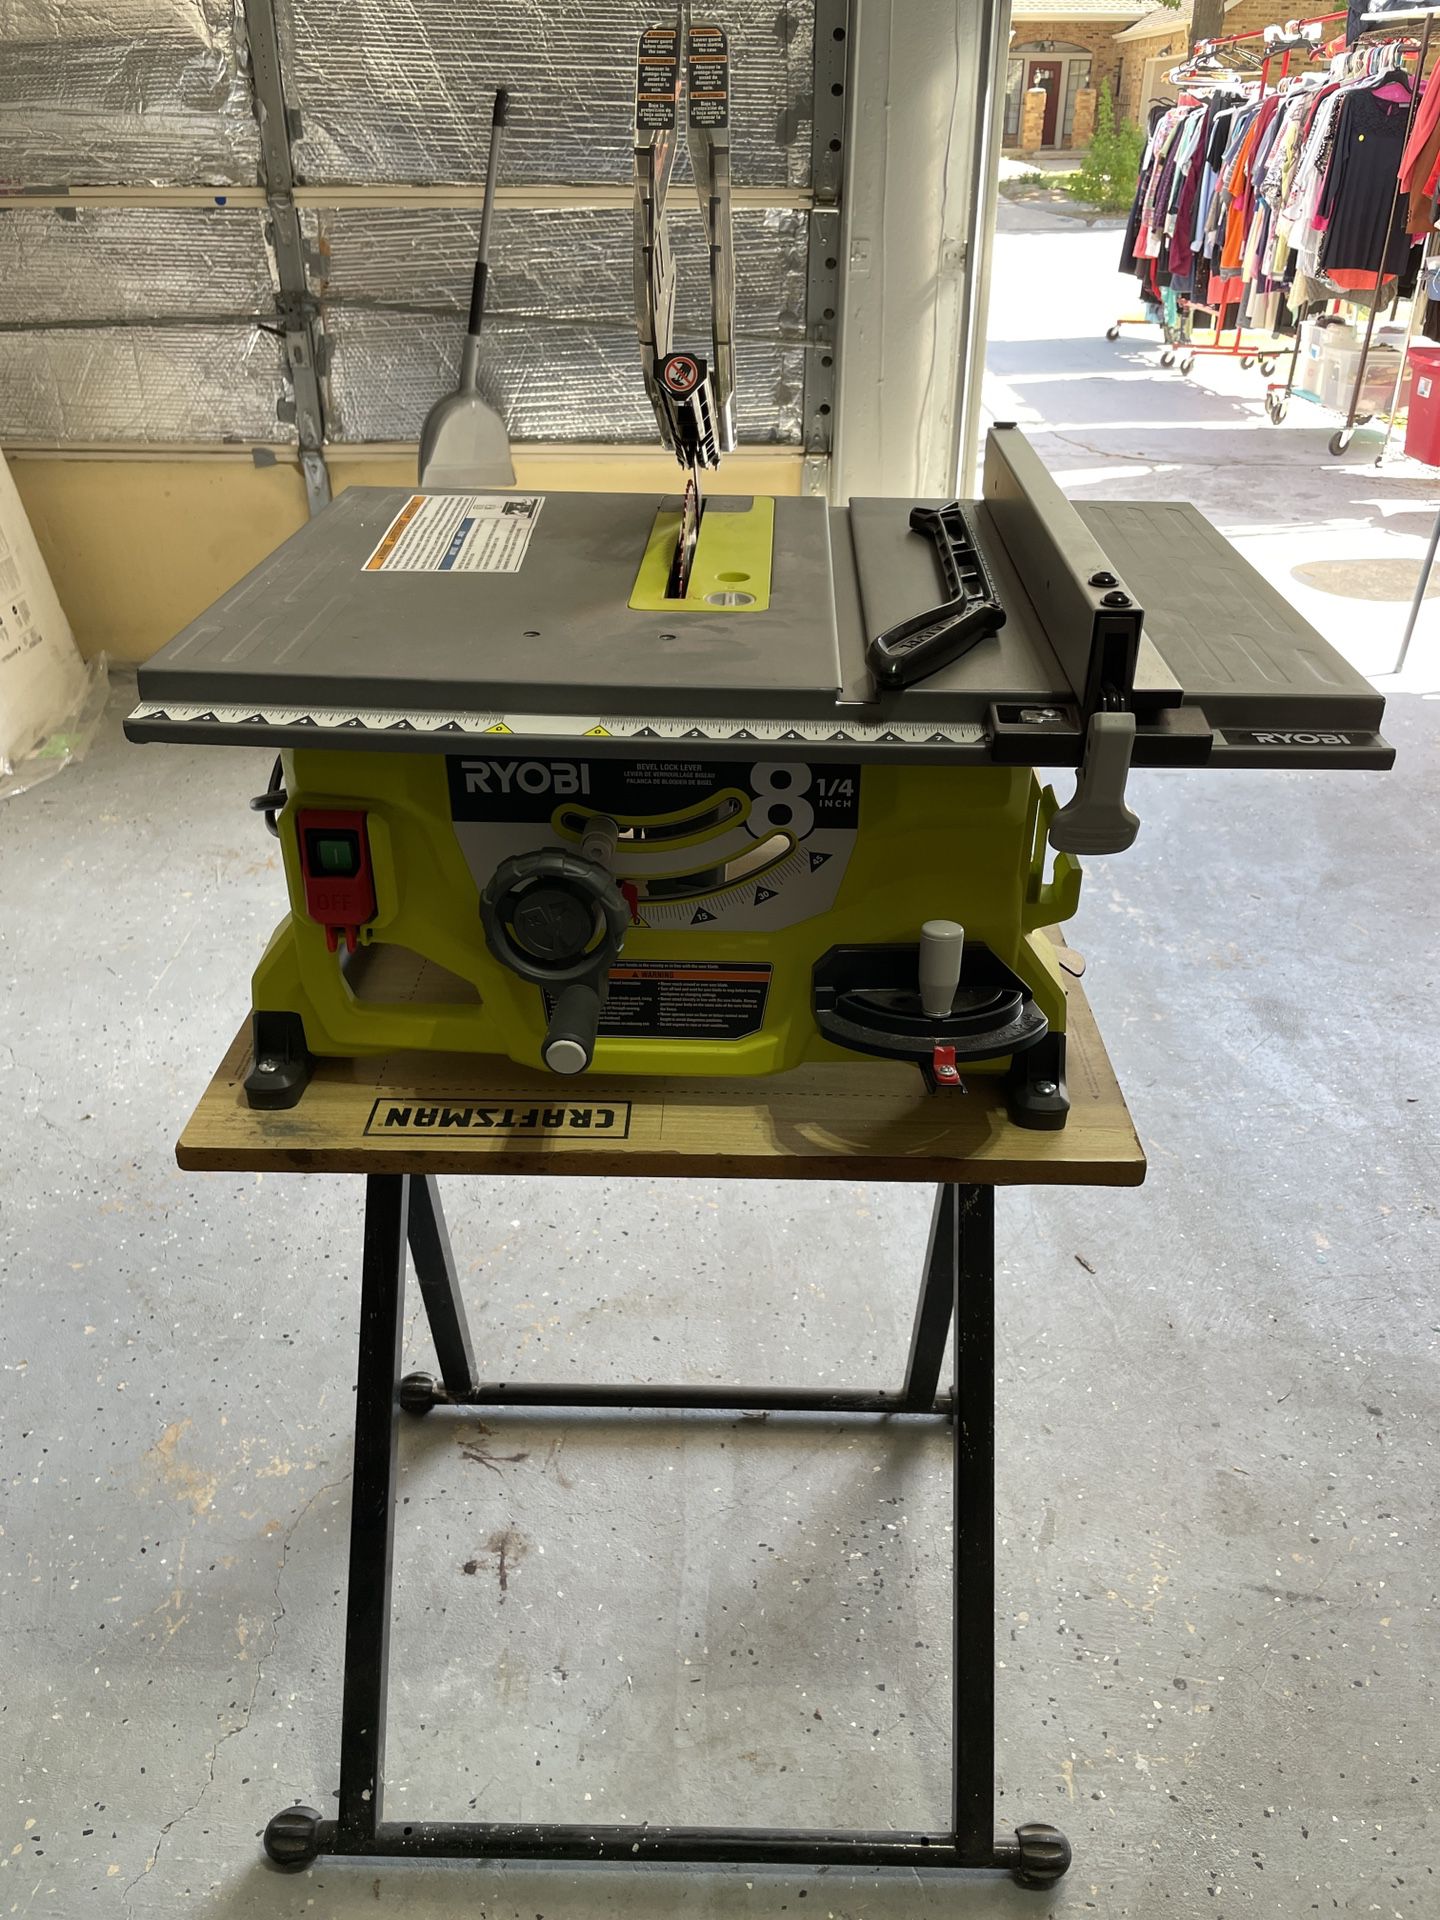 Ryobi 13 Amp 8-1/4 in. Compact Portable Corded Jobsite Table Saw with  Craftsman Stand for Sale in Pflugerville, TX OfferUp